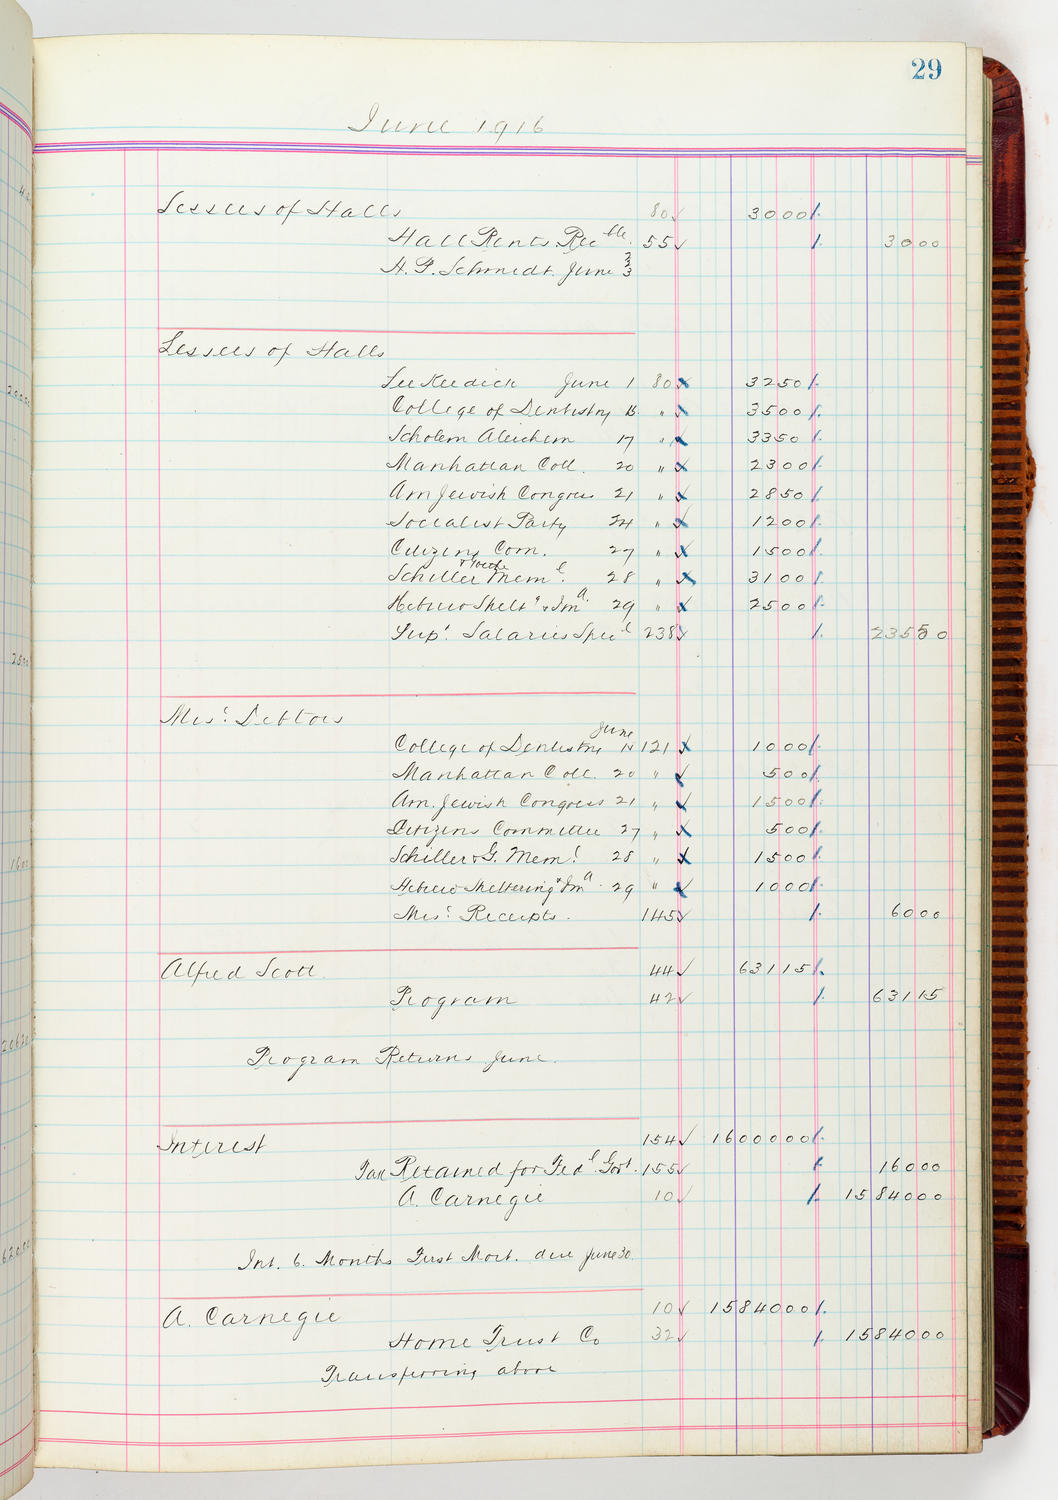 Music Hall Accounting Ledger, volume 5, page 29